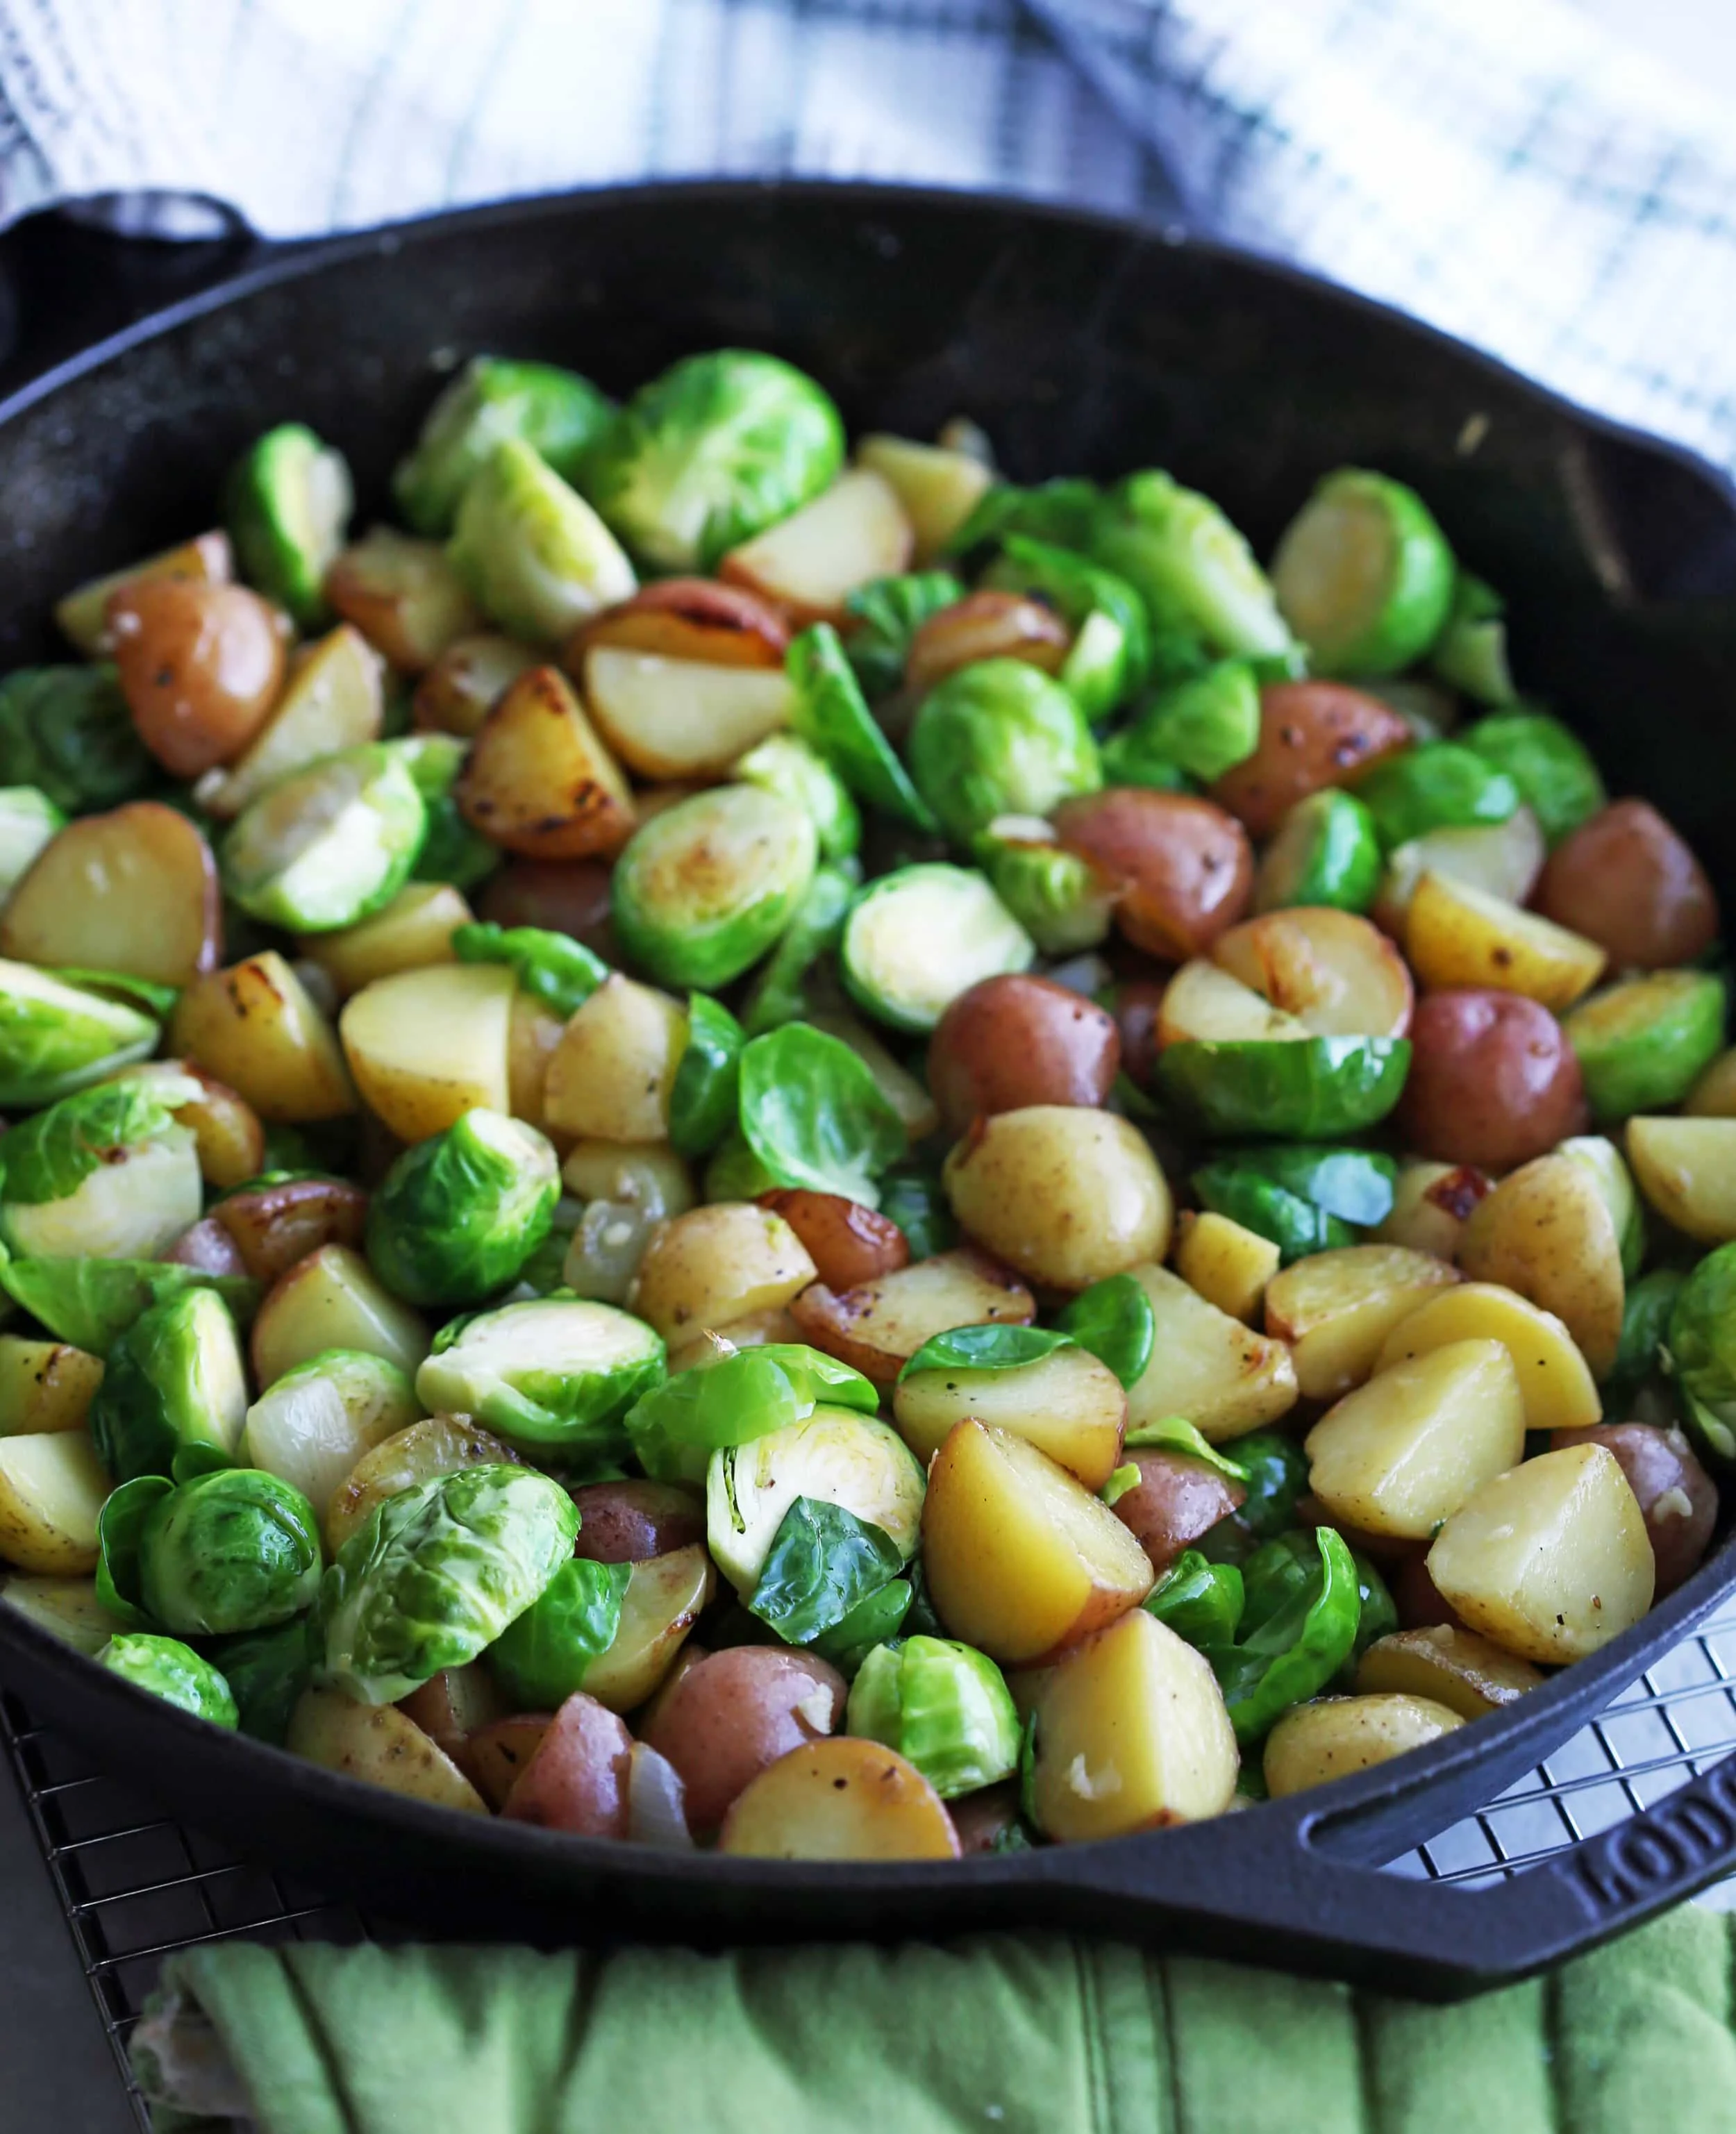 Sautéed onions, chopped baby potatoes, and halved Brussels sprouts in a cast iron skillet.